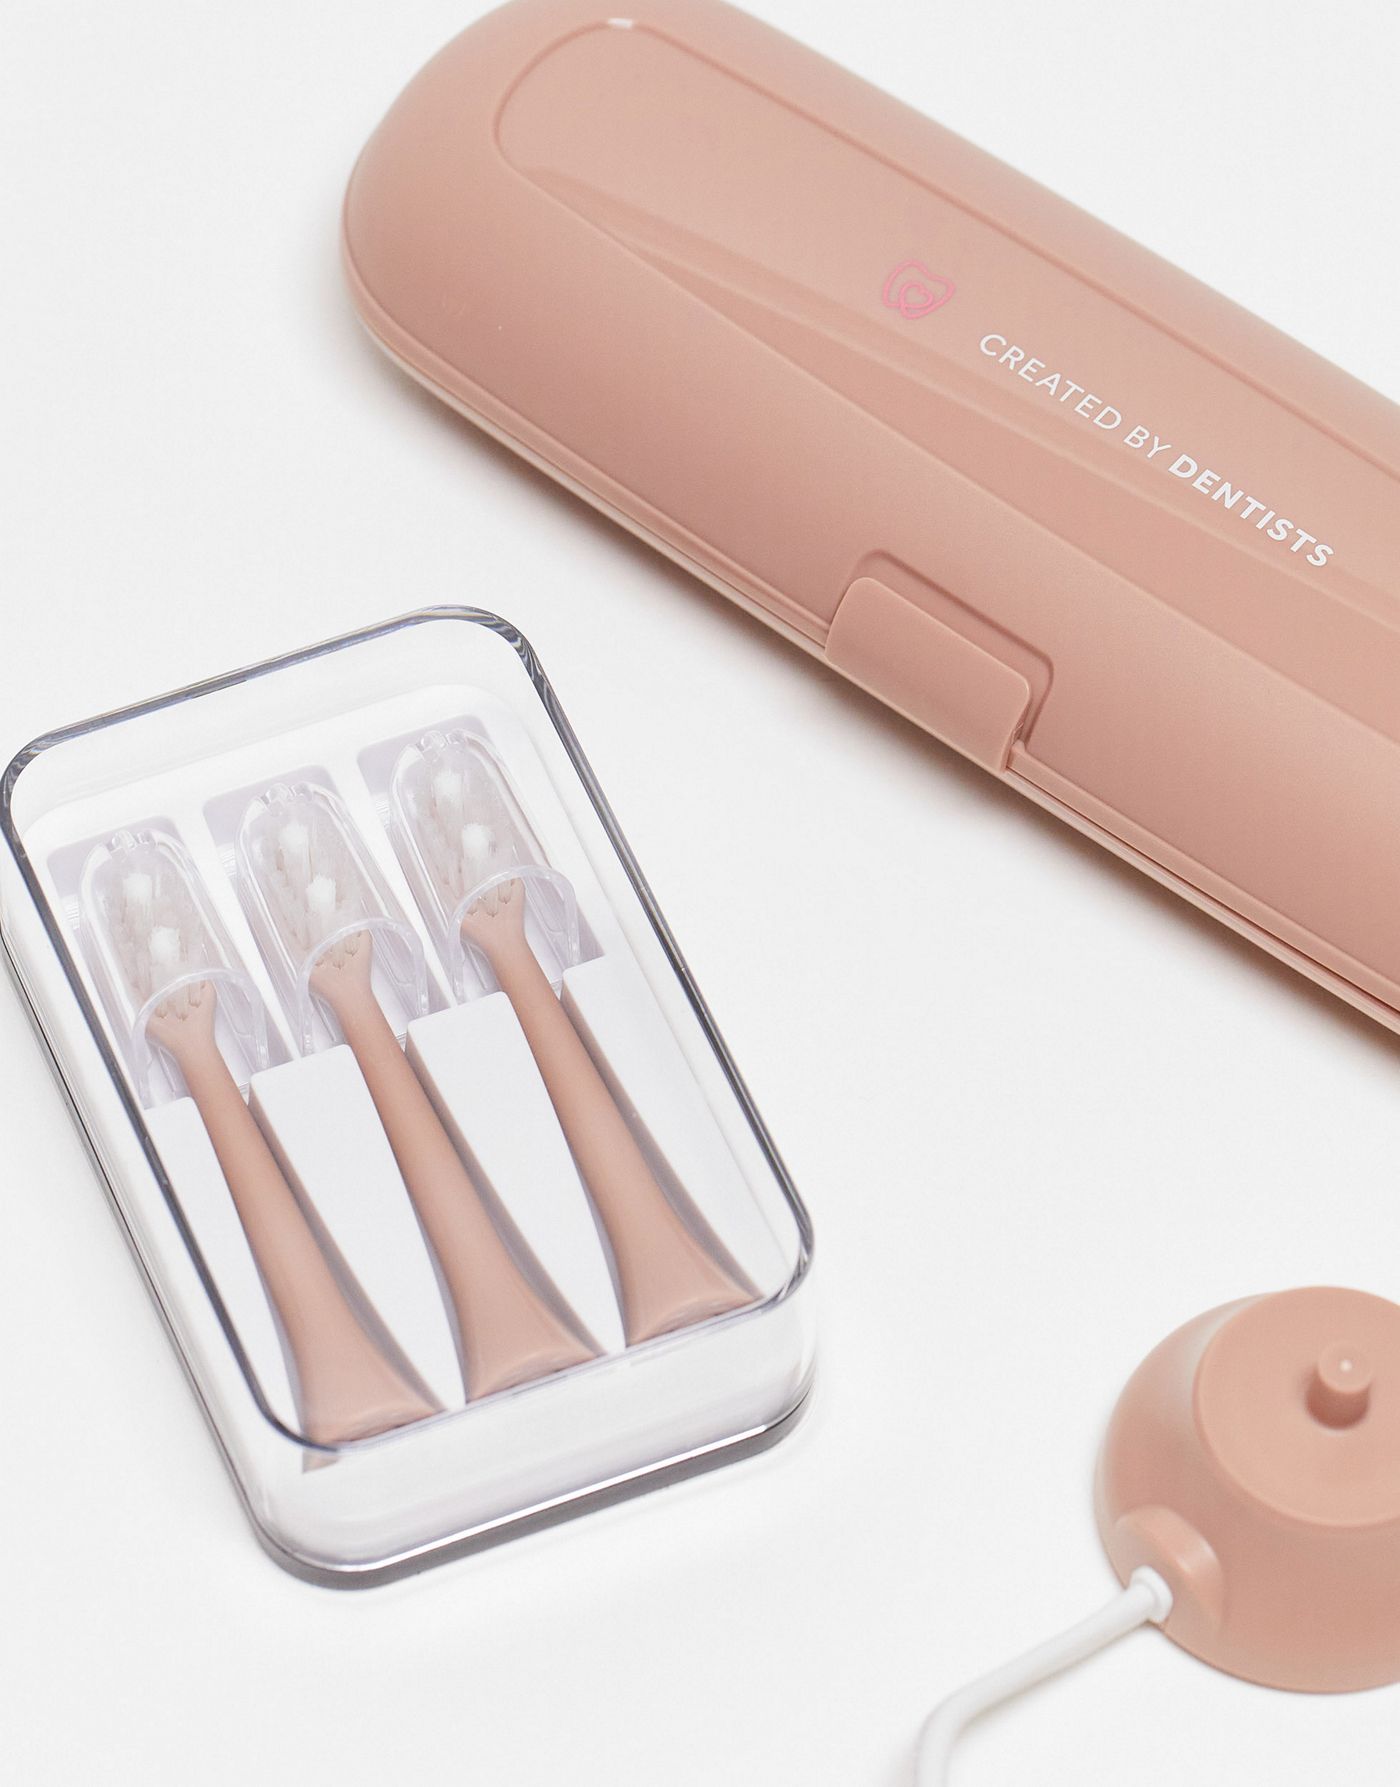 Spotlight Oral Care Rose Gold Sonic Toothbrush